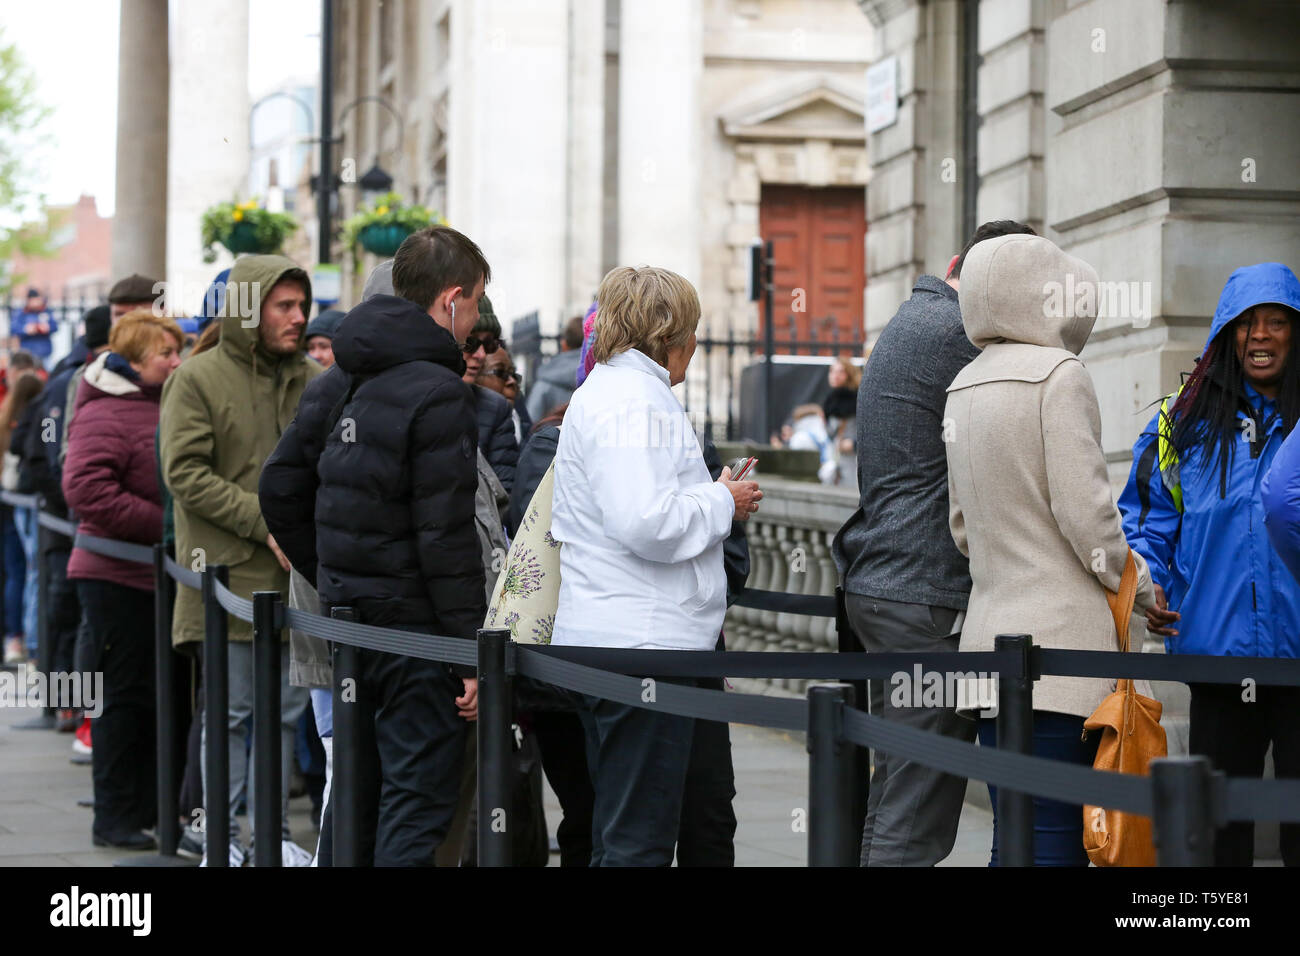 London, UK. 27th Apr 2019. South Africans queue outside High Commission of South Africa in London waiting to cast their vote in this year's general election. Over 9000 South Africans have registered to vote in the UK, which is the highest number of registered voters living abroad. The Electoral Commission has extended voting hours for South African citizens in London until 11:30 pm on Saturday night because of the Vaisakhi Festival at Trafalgar Square.  Credit: Dinendra Haria/Alamy Live News Stock Photo